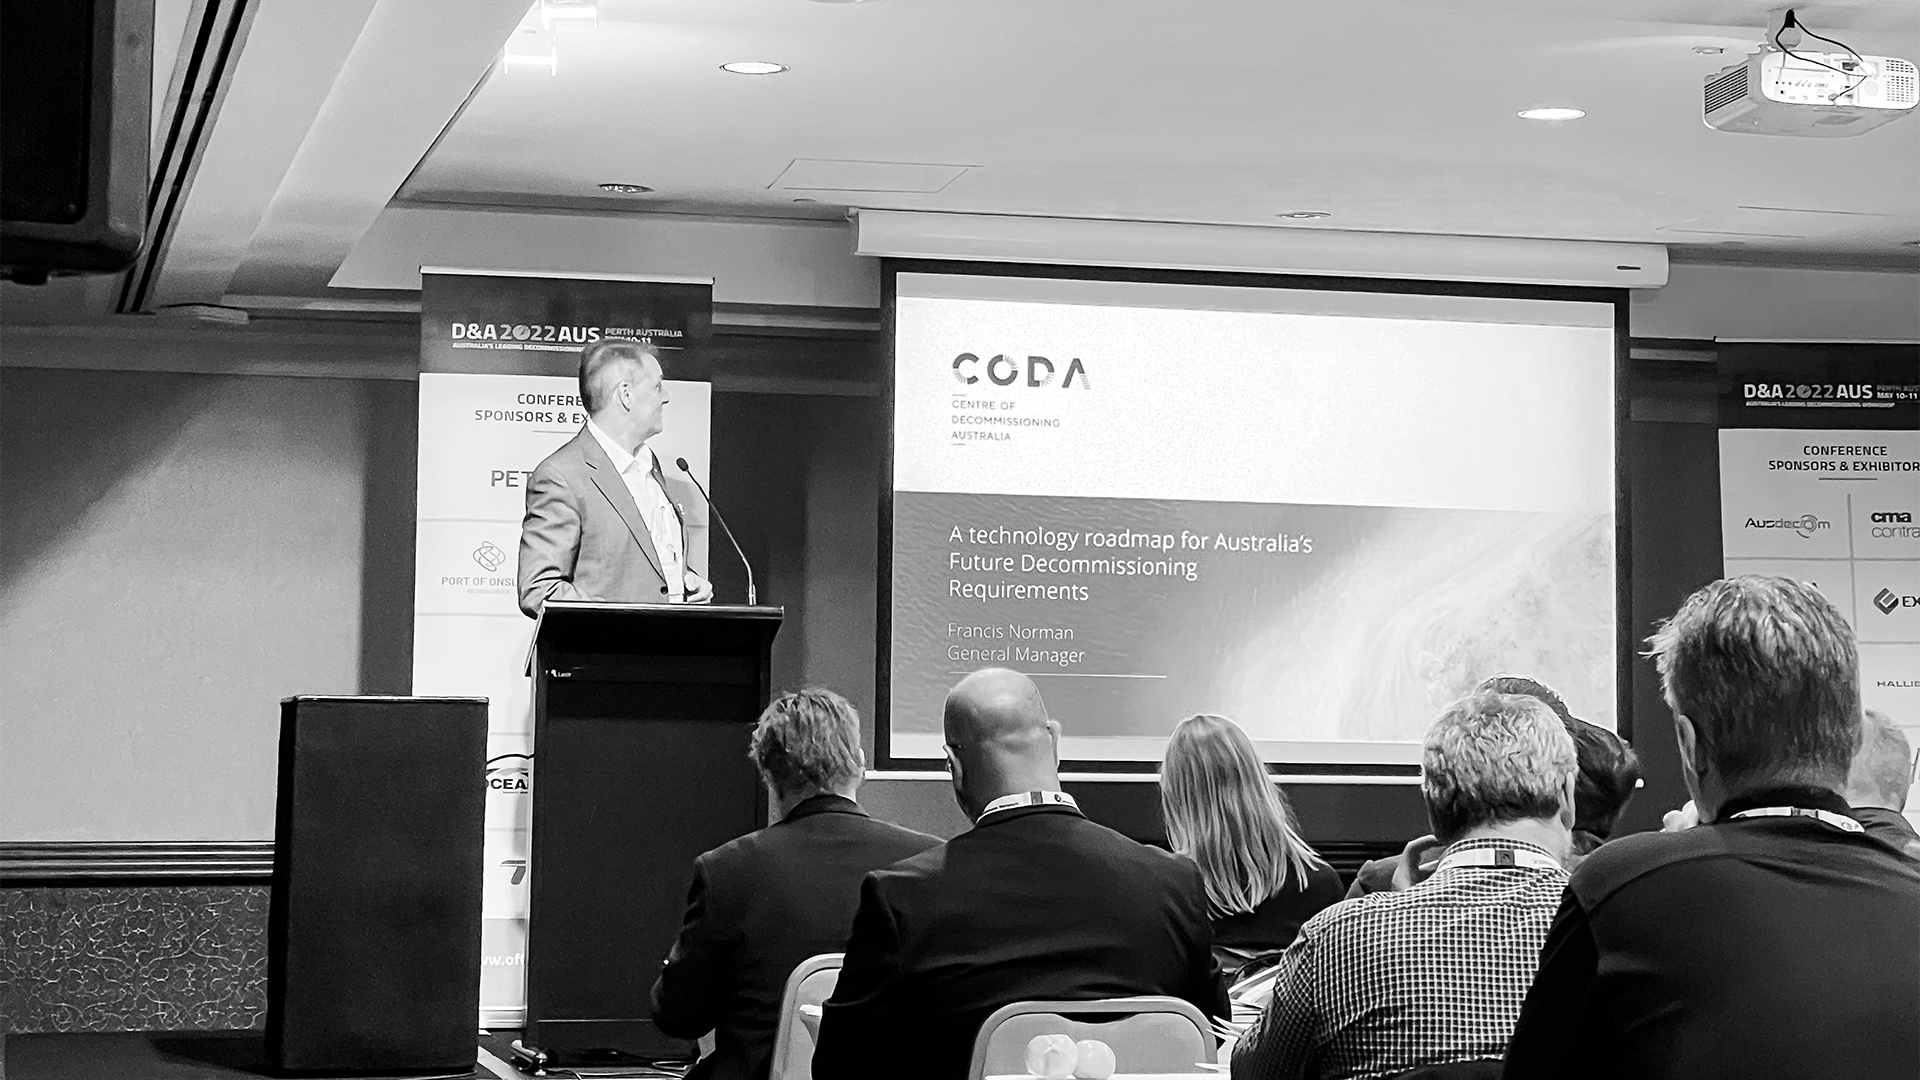 Dr Francis Norman of the Centre of Decommissioning Australia presenting 'A technology roadmap for Australia's Future Decommissioning Requirements' at D&A 2022